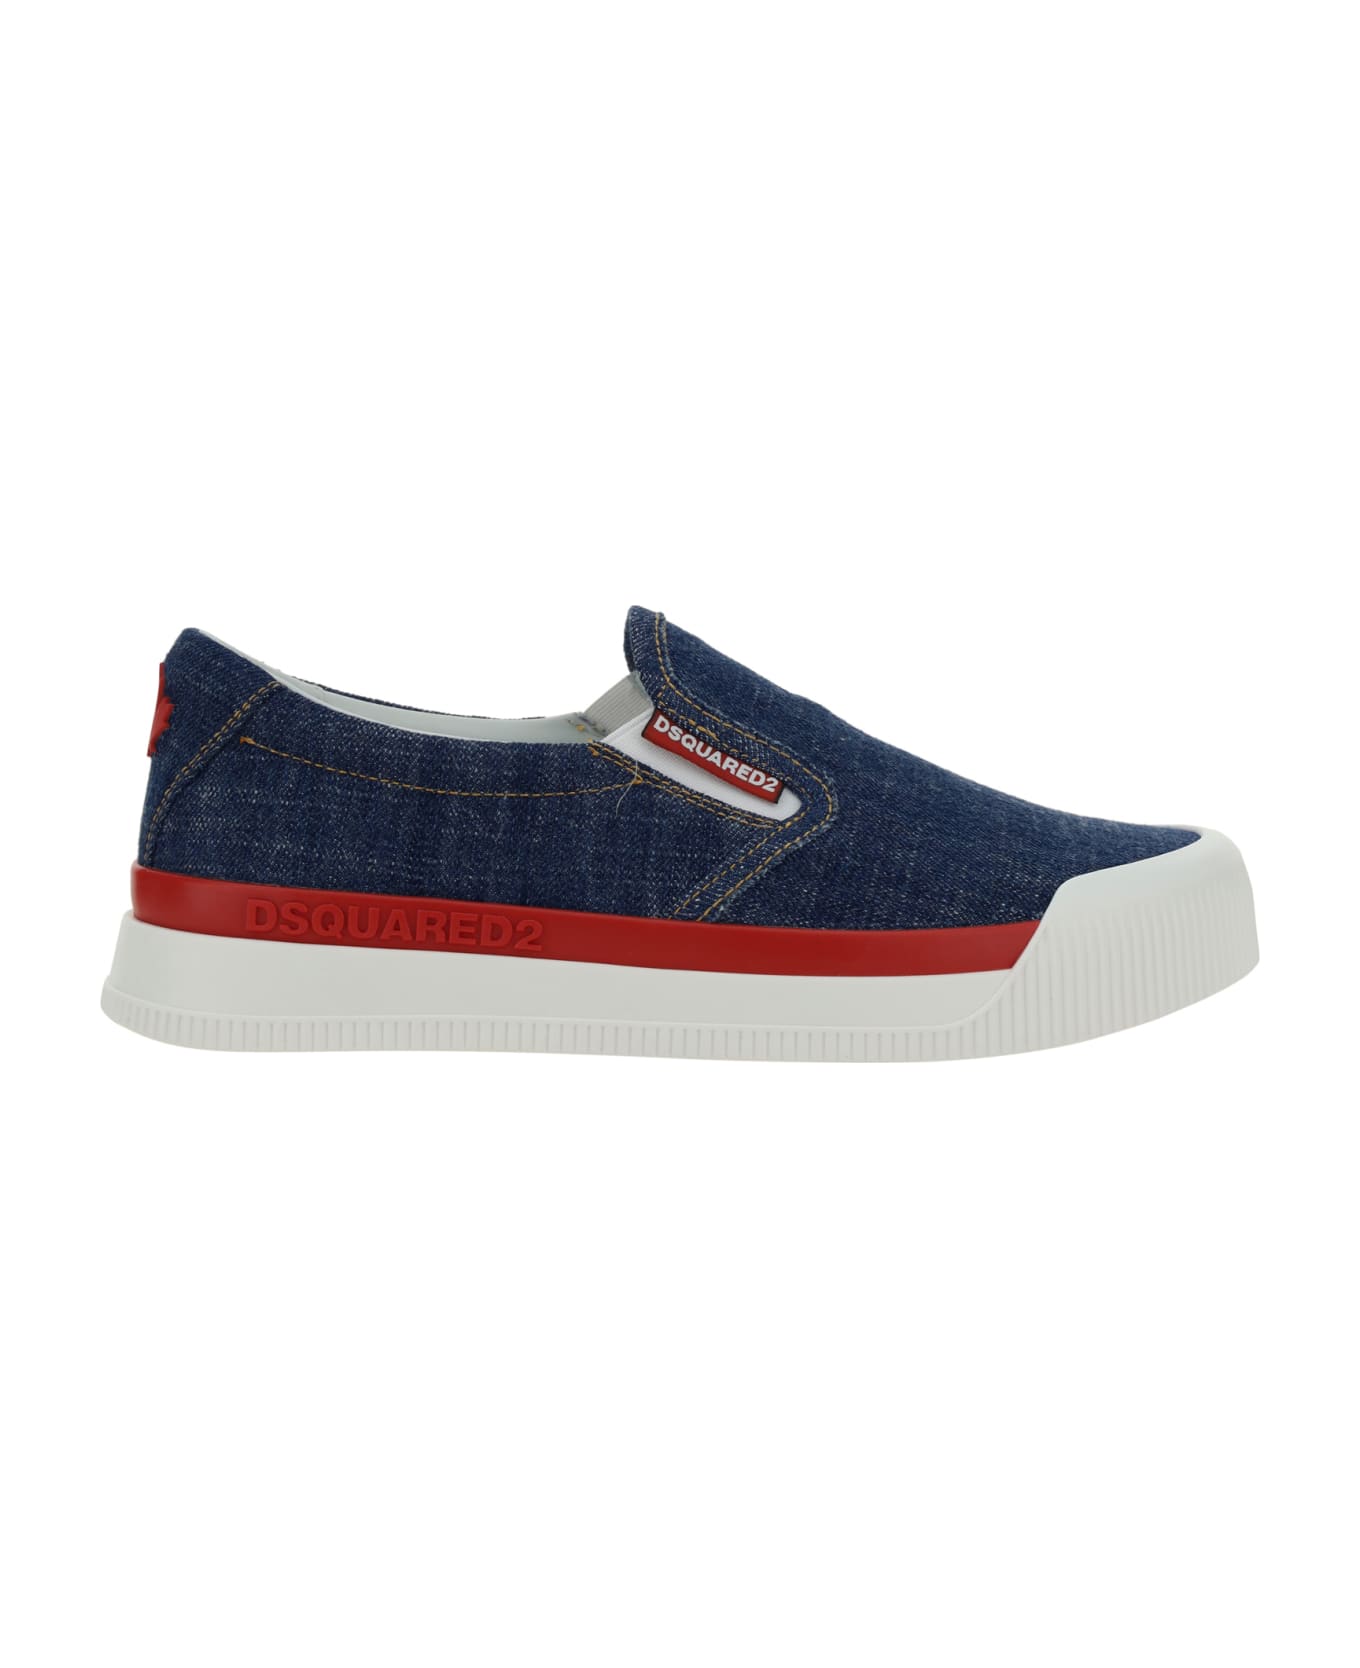 Dsquared2 Sneakers - M2852 スニーカー